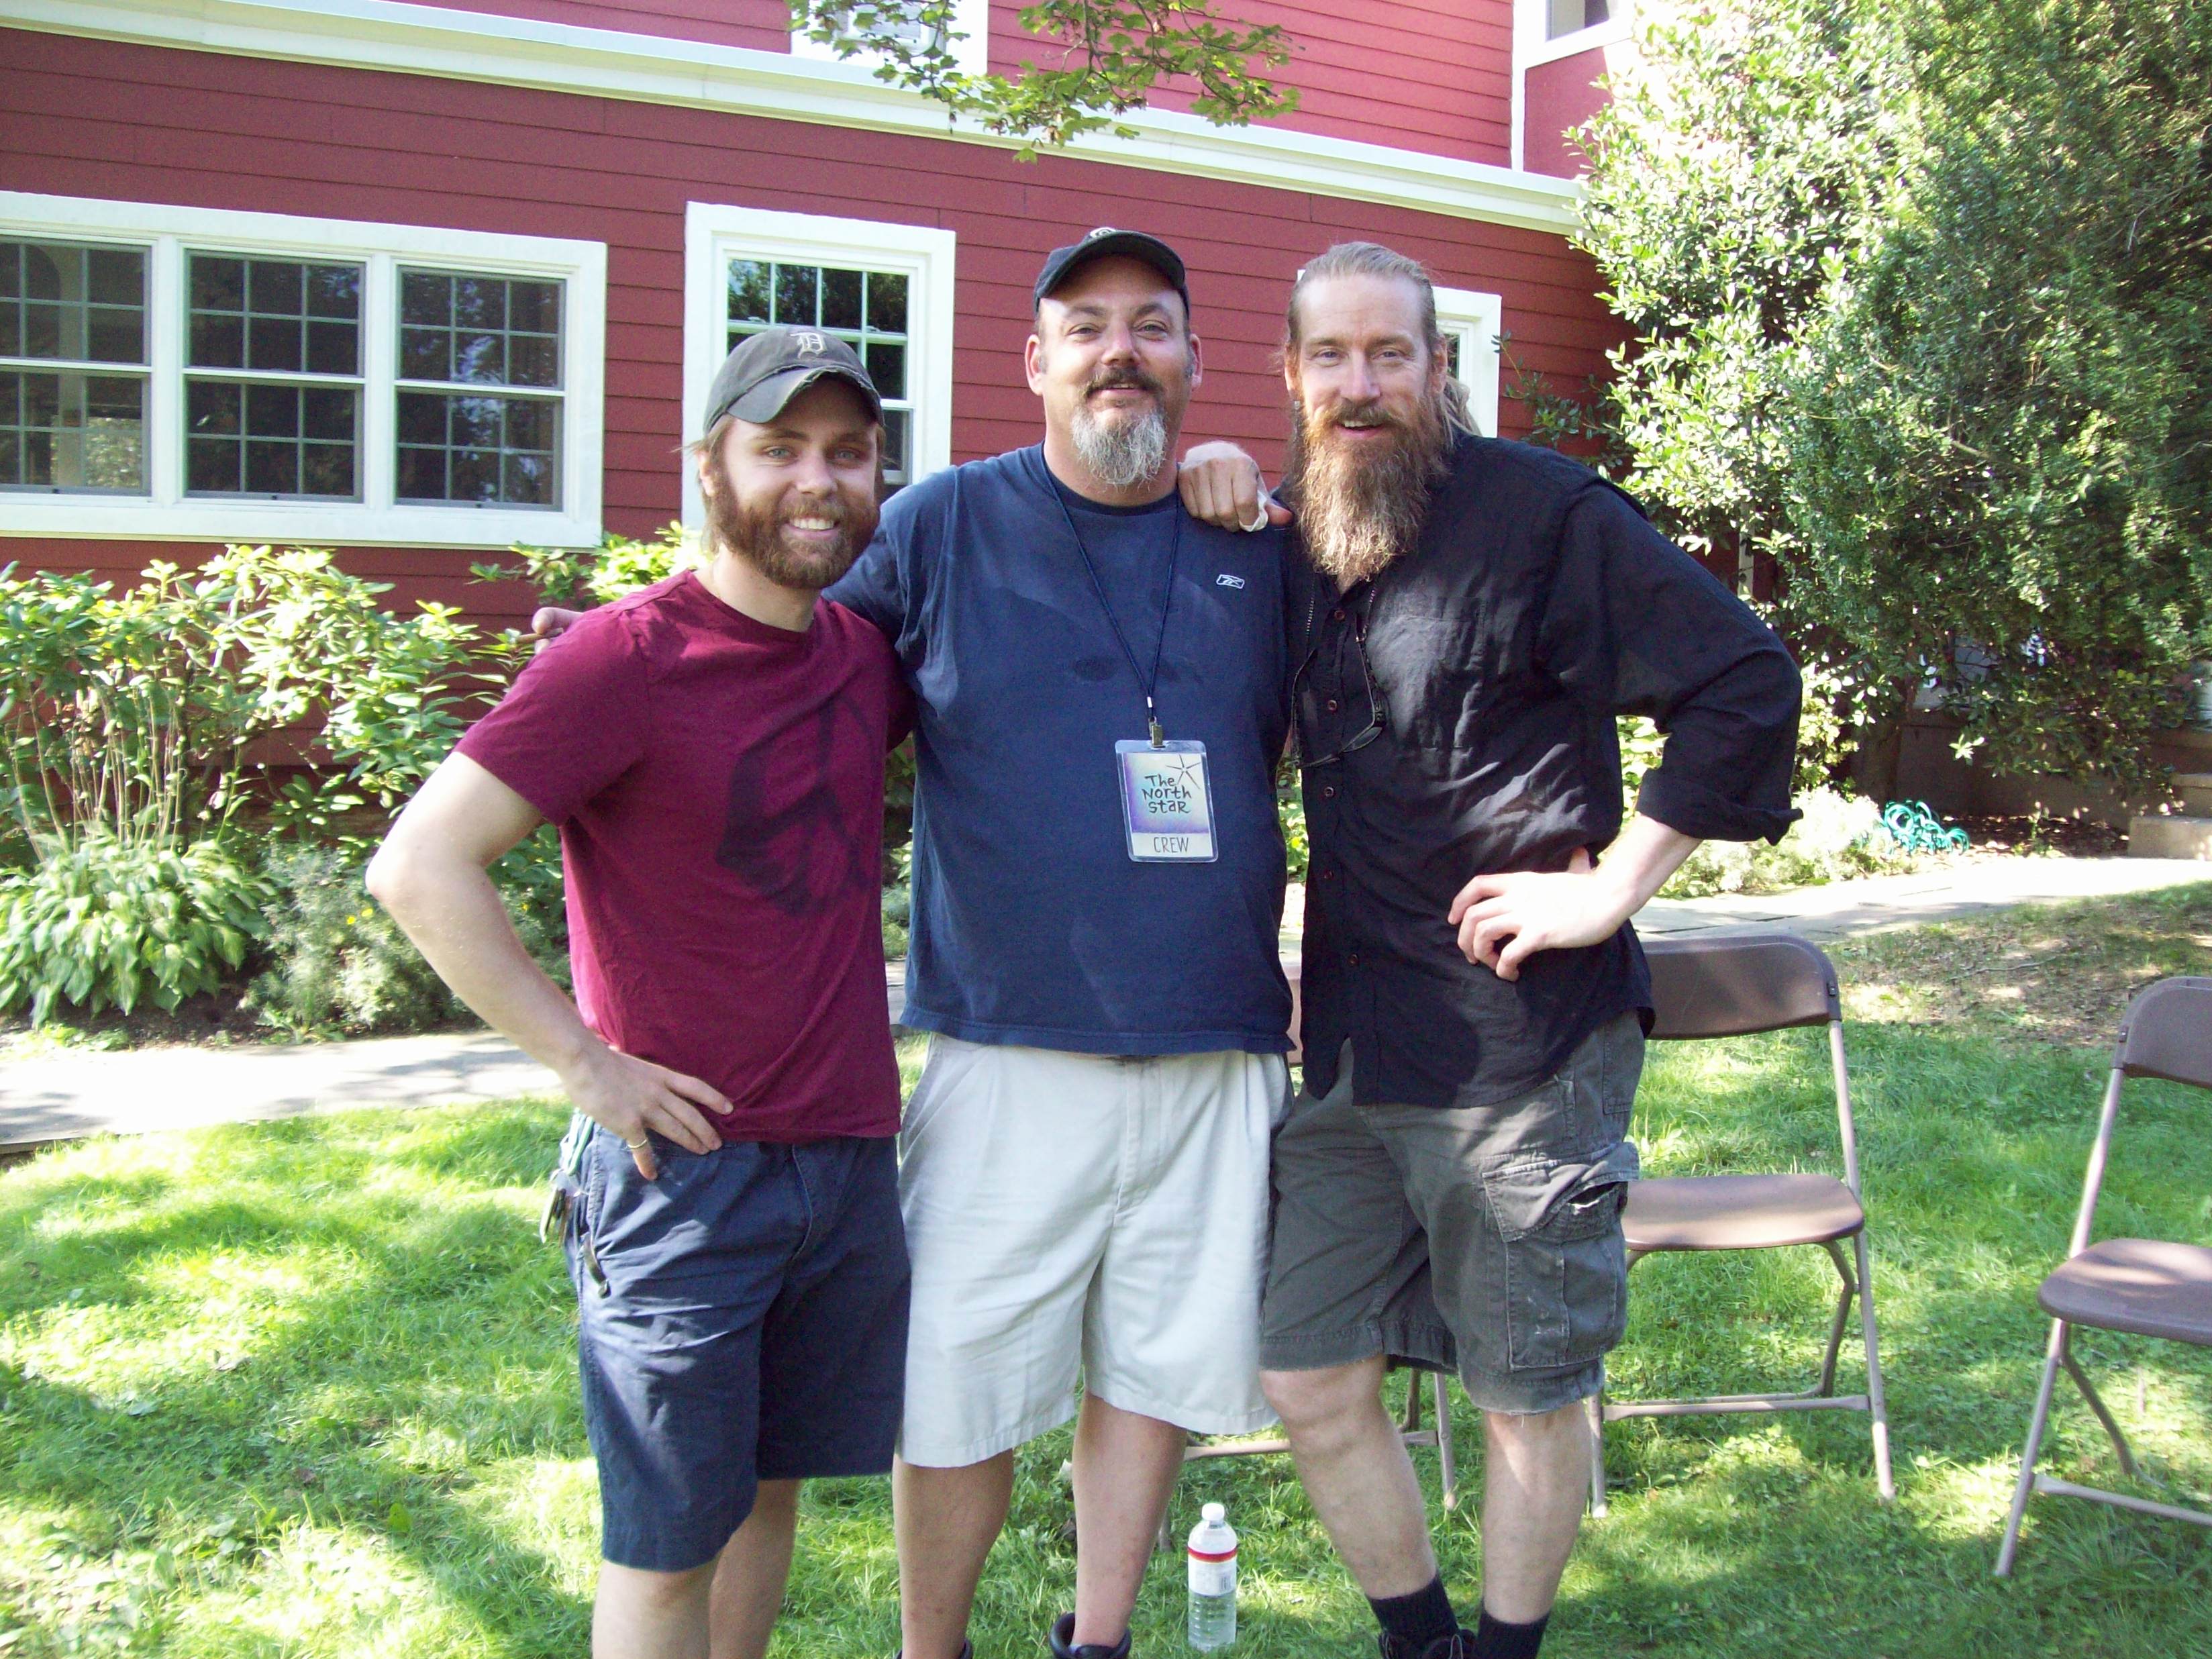 Beards! With Drew Bruck (Robert) and Doug Gibson (Randall) of The North Star.